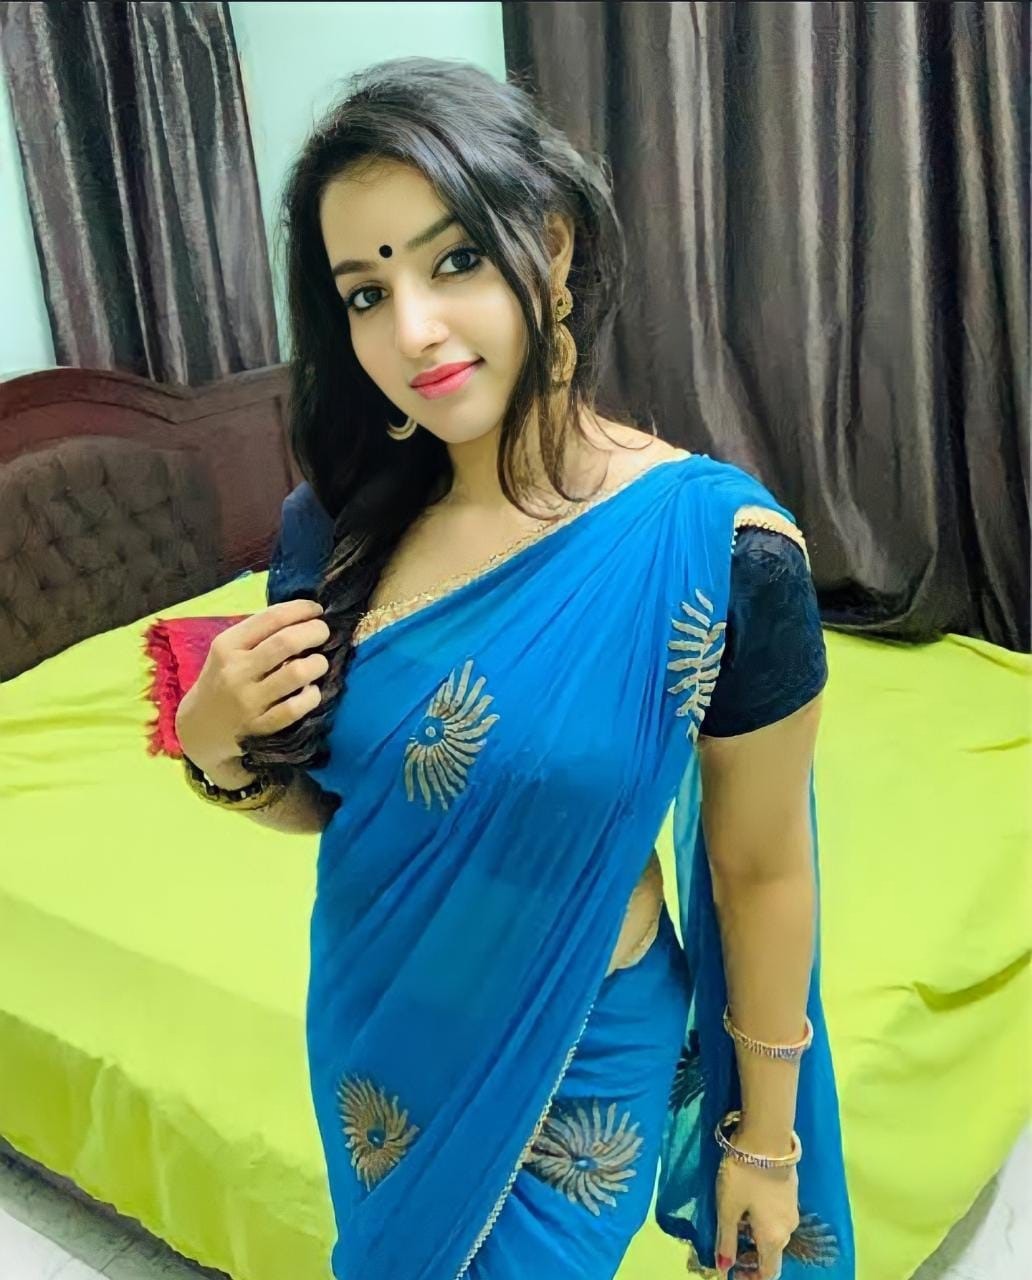 Call Girls Available In Paschim Vihar 9650313428 Escorts Service In Delhi Ncr